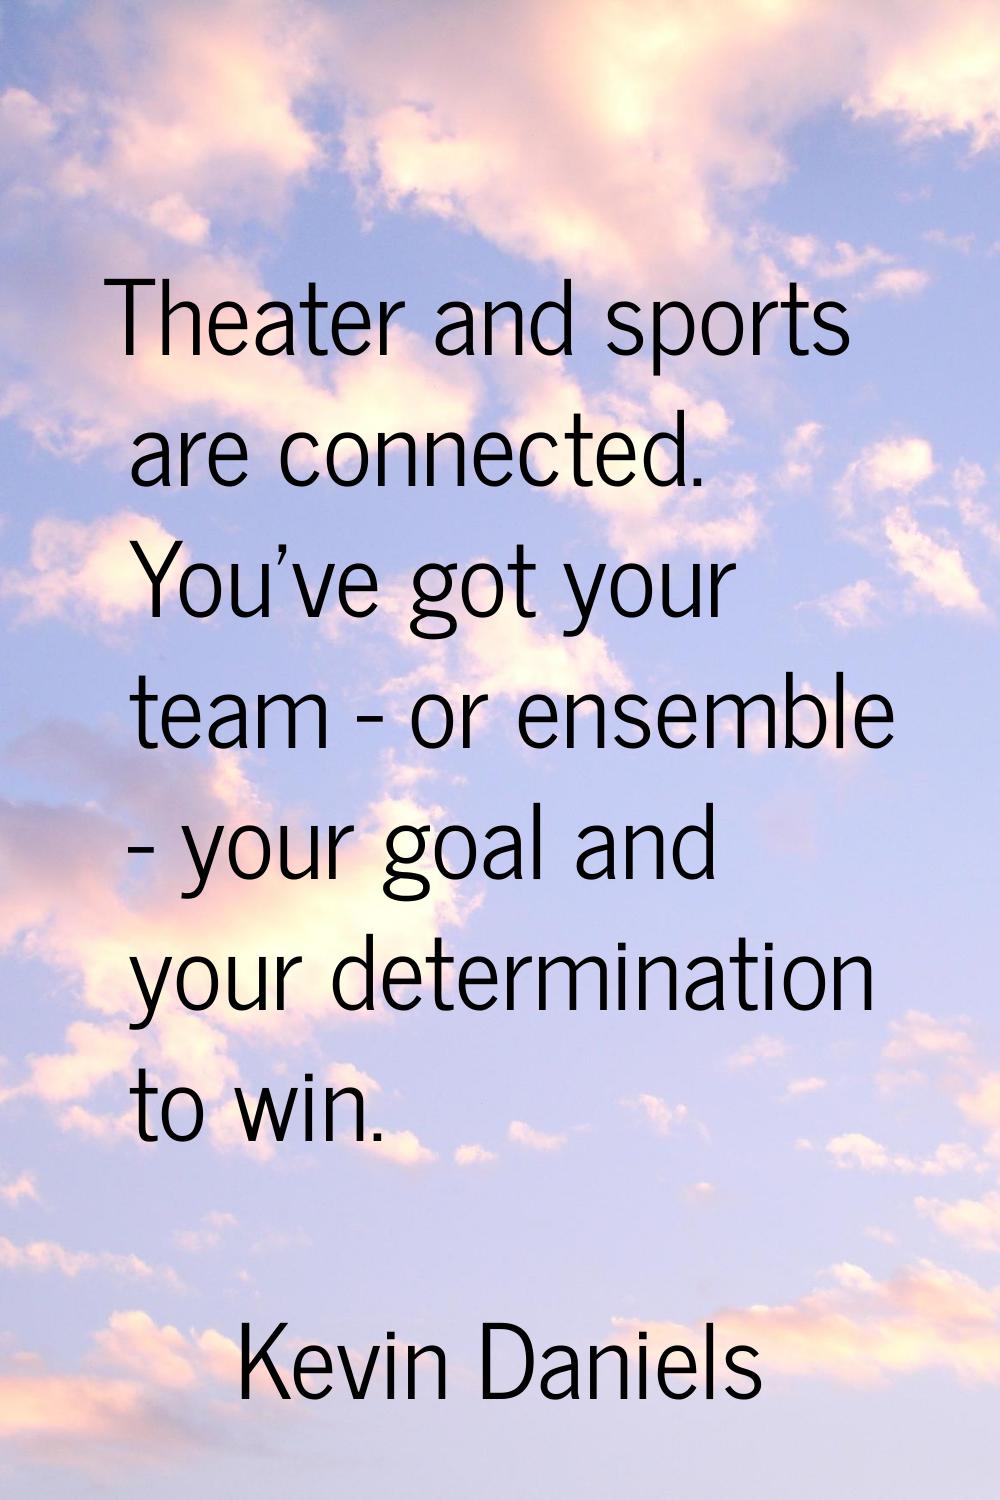 Theater and sports are connected. You've got your team - or ensemble - your goal and your determina